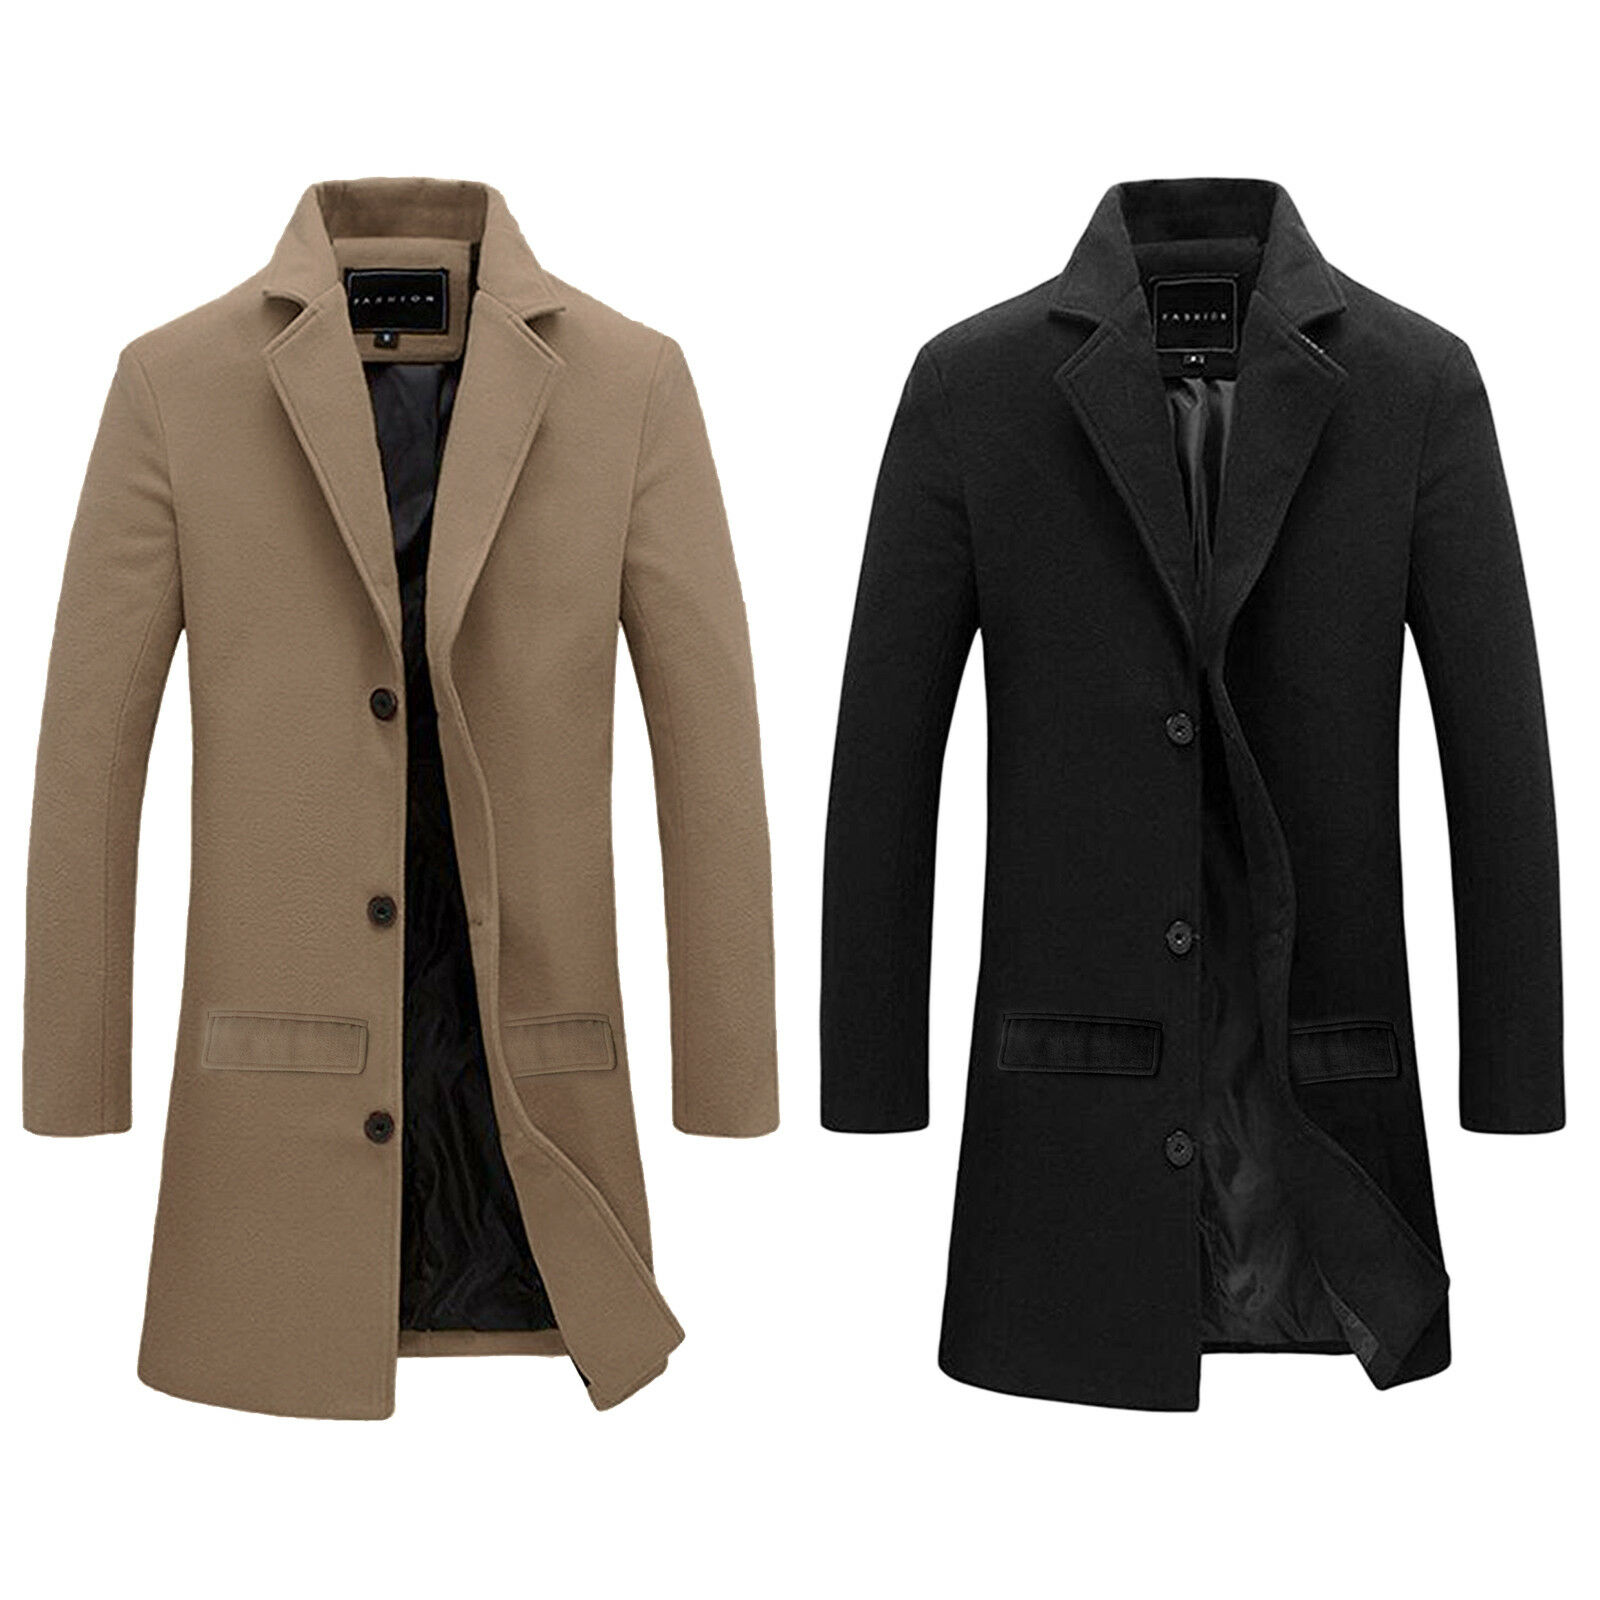 MENS TRENCH COAT CLASSIC SLIM FIT NOTCHED COLLAR STYLISH OVERCOAT OUTWEAR JACKET